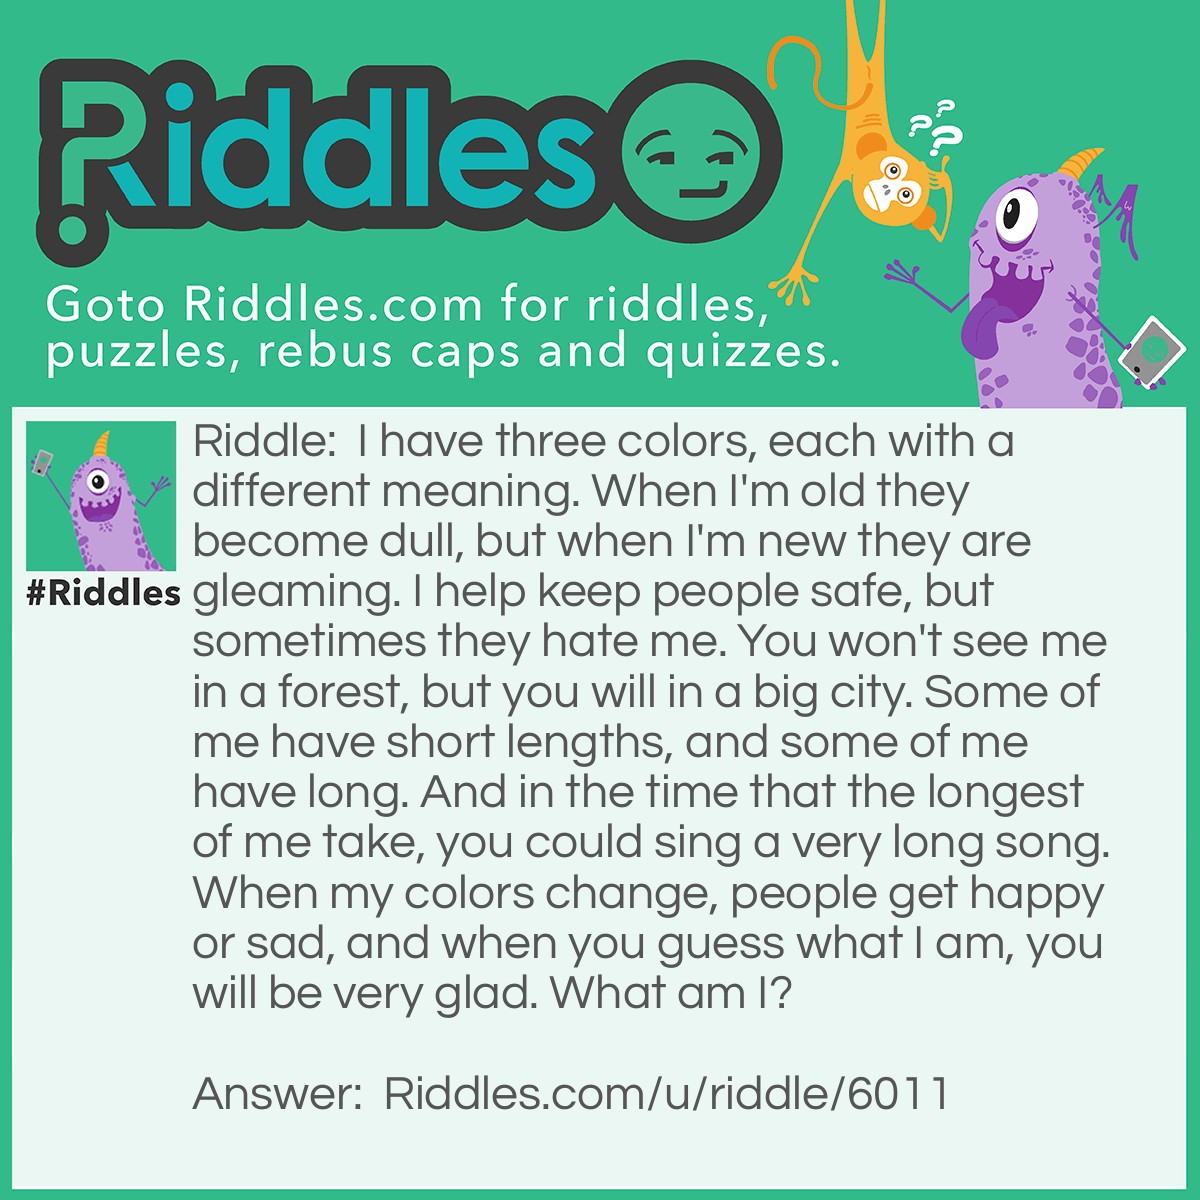 Riddle: I have three colors, each with a different meaning. When I'm old they become dull, but when I'm new they are gleaming. I help keep people safe, but sometimes they hate me. You won't see me in a forest, but you will in a big city. Some of me have short lengths, and some of me have long. And in the time that the longest of me take, you could sing a very long song. When my colors change, people get happy or sad, and when you guess what I am, you will be very glad. What am I? Answer: A Stoplight.